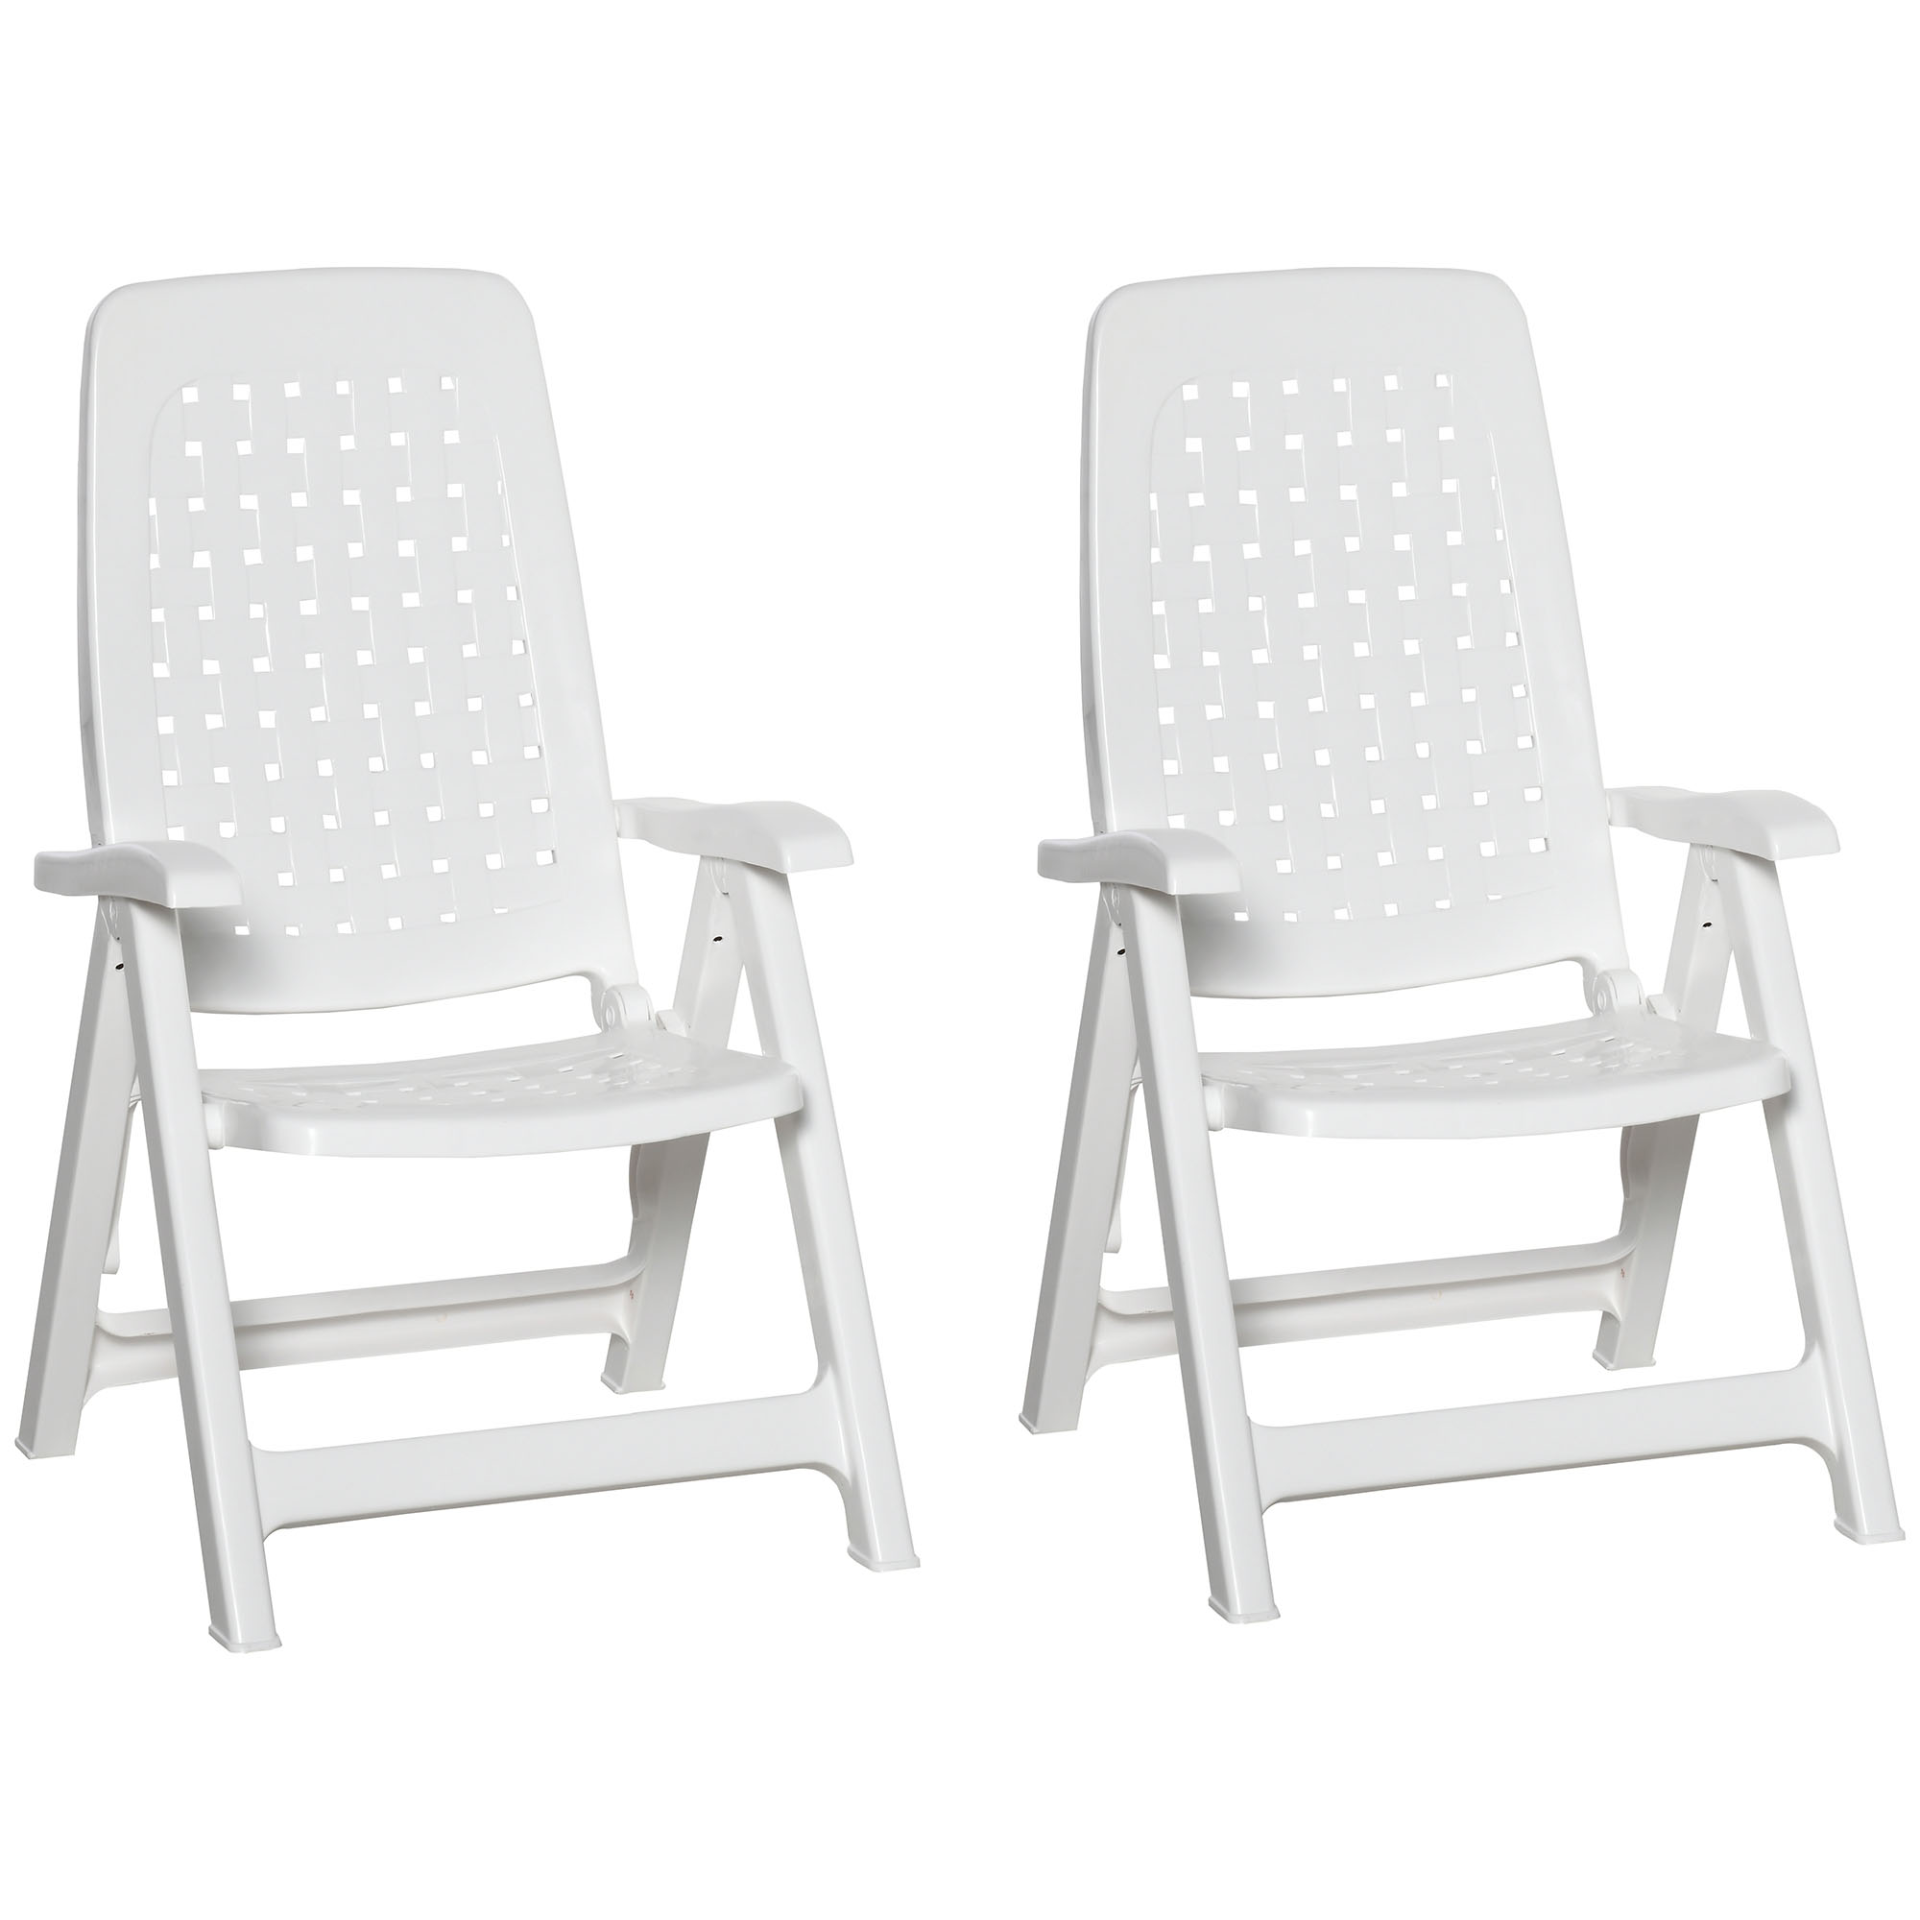 Outsunny Set of 2 Folding Plastic Dining Chairs - 4-Position Backrest, Reclining Armchairs for Indoor & Outdoor Events, Camping - White Camping Chair Cosy Camping Co. White  